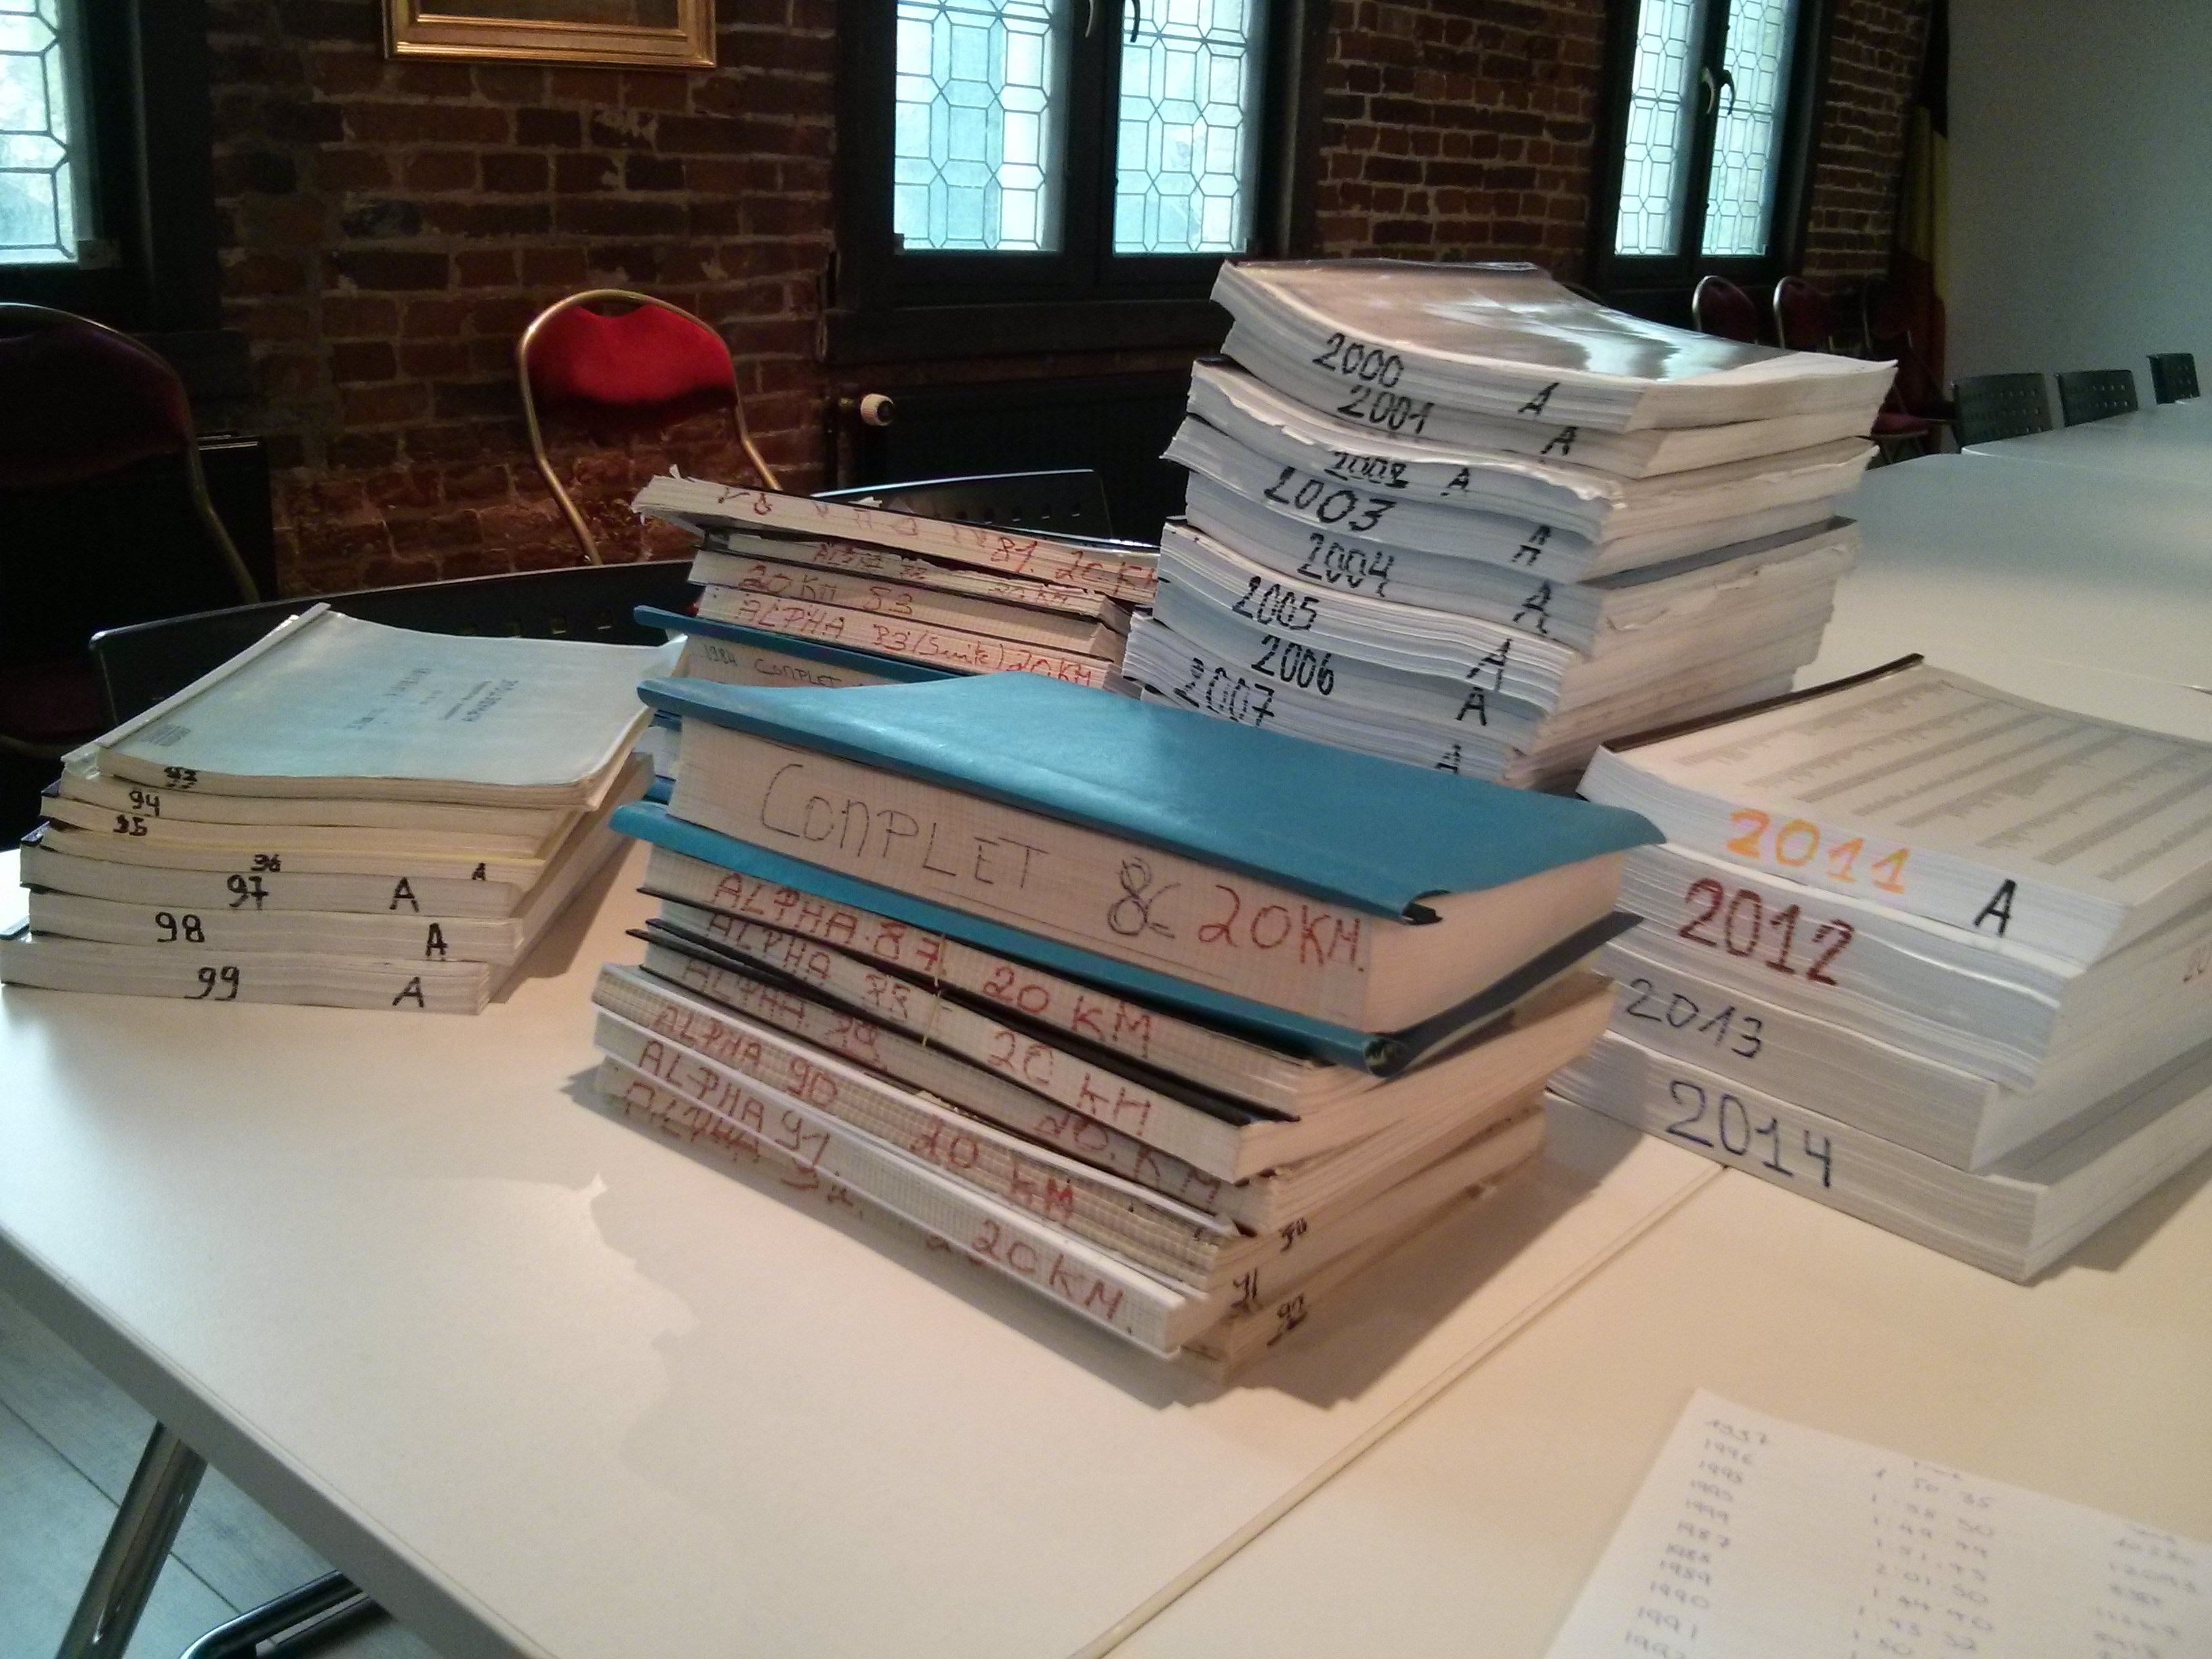 The pile of books we were handed.